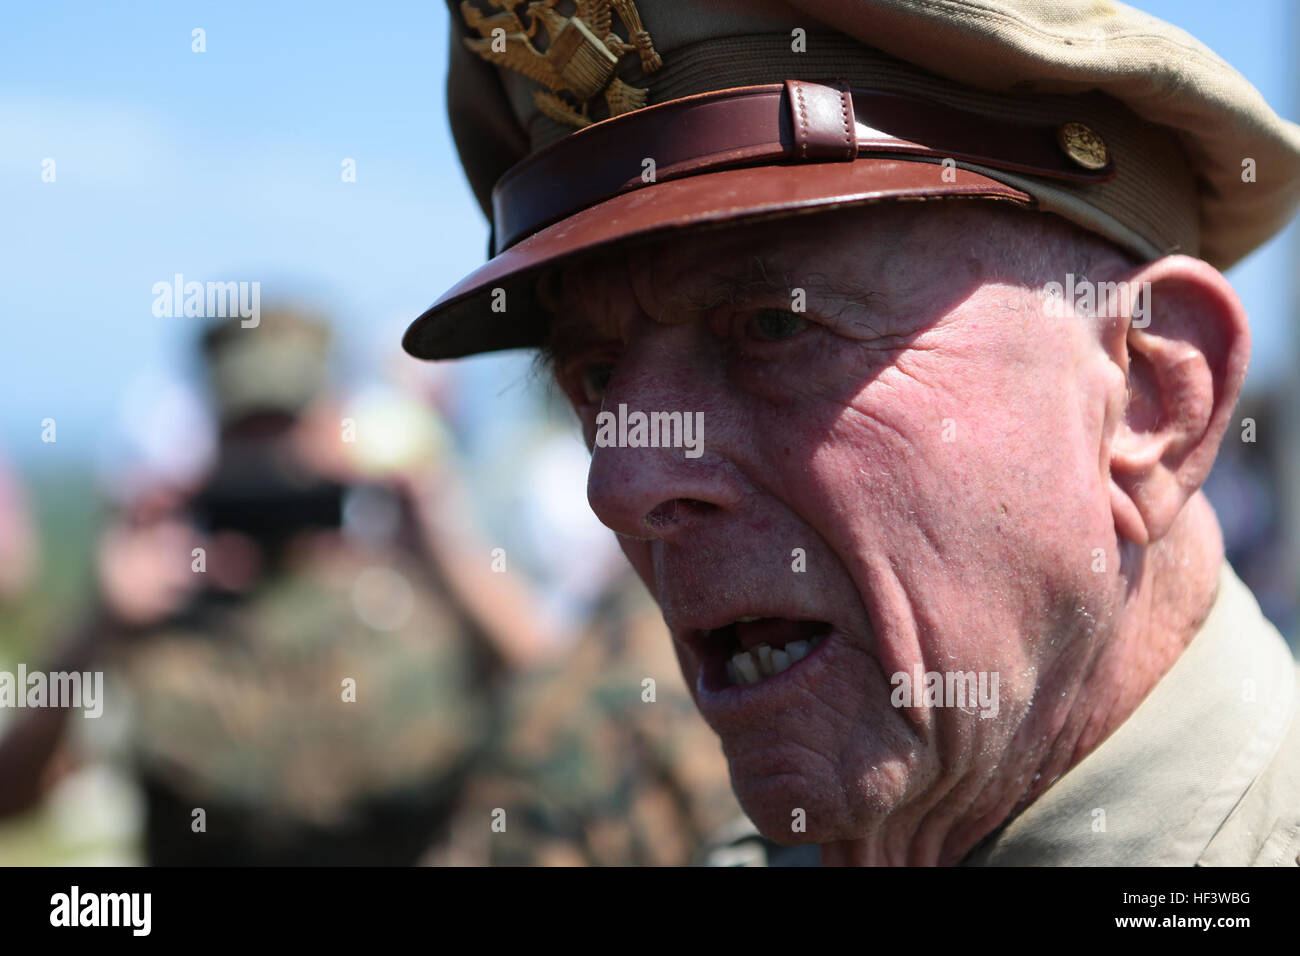 Retired U.S. Army Air Corps Capt. Jerry Yellin attends the 71st Commemoration of the Battle of Iwo Jima at Iwo To, Japan, March 19, 2016. The Iwo Jima Reunion of Honor is an opportunity for Japanese and U.S. veterans and their families, dignitaries, leaders and service members from both nations to honor the battle while recognizing 71 years of peace and prosperity in the U.S. – Japanese alliance. (U.S. Marine Corps photo by MCIPAC Combat Camera Lance Cpl. Juan Esqueda / Released) Iwo Jima 71st Reunion of Honor 160319-M-JD520-103 Stock Photo